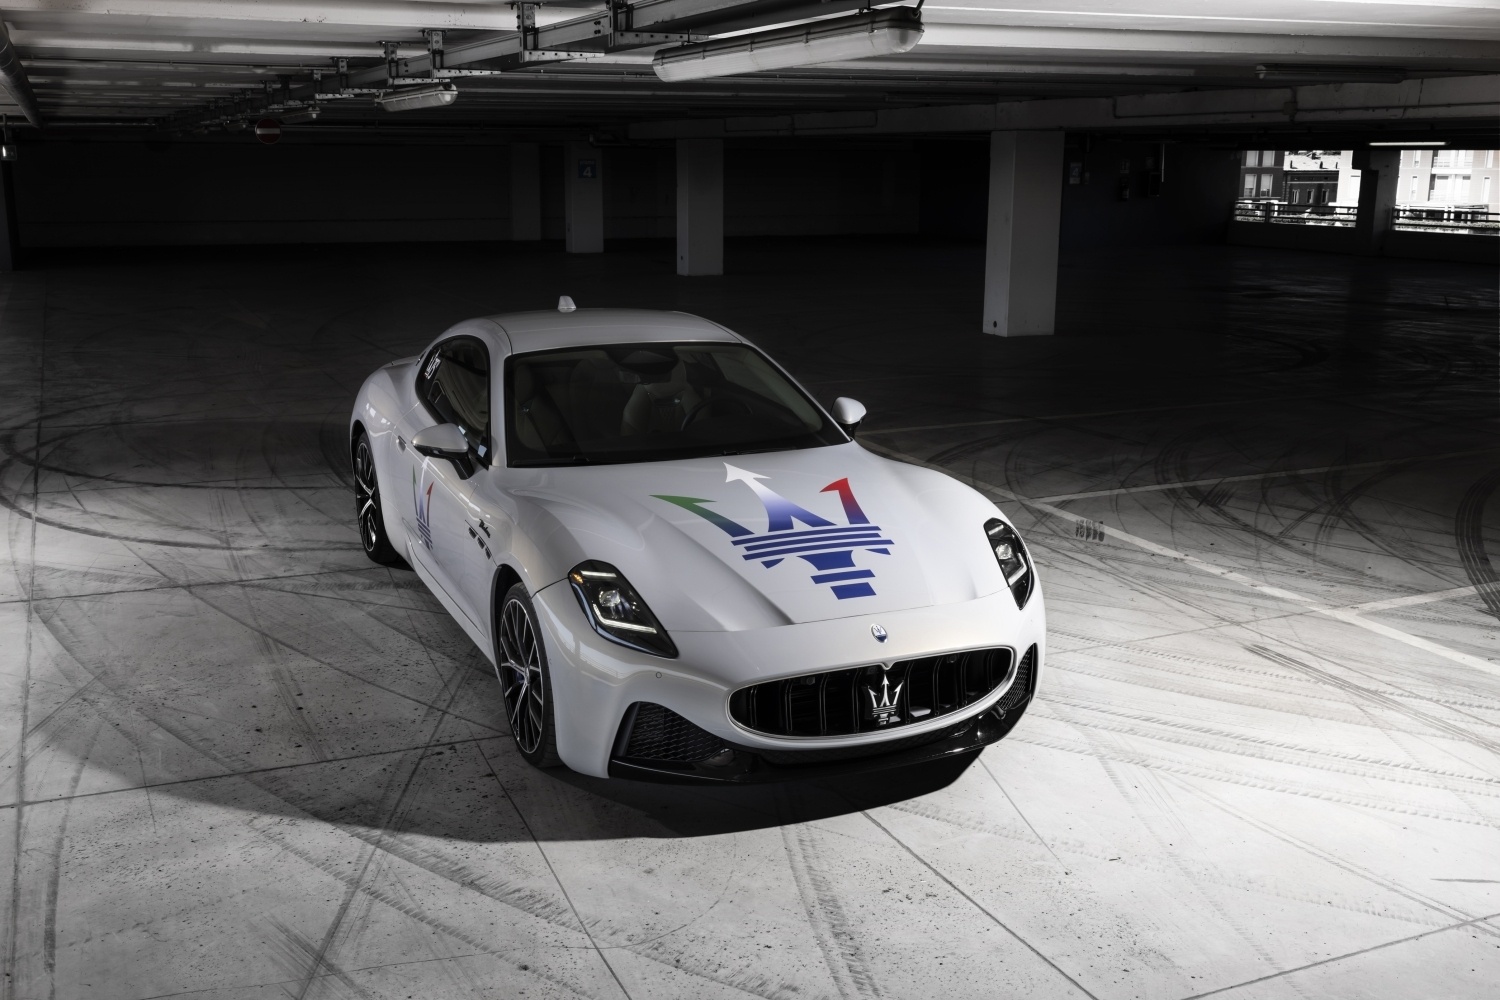 The All-new GranTurismo takes to the streets. The Maserati Family is in the driving seat.